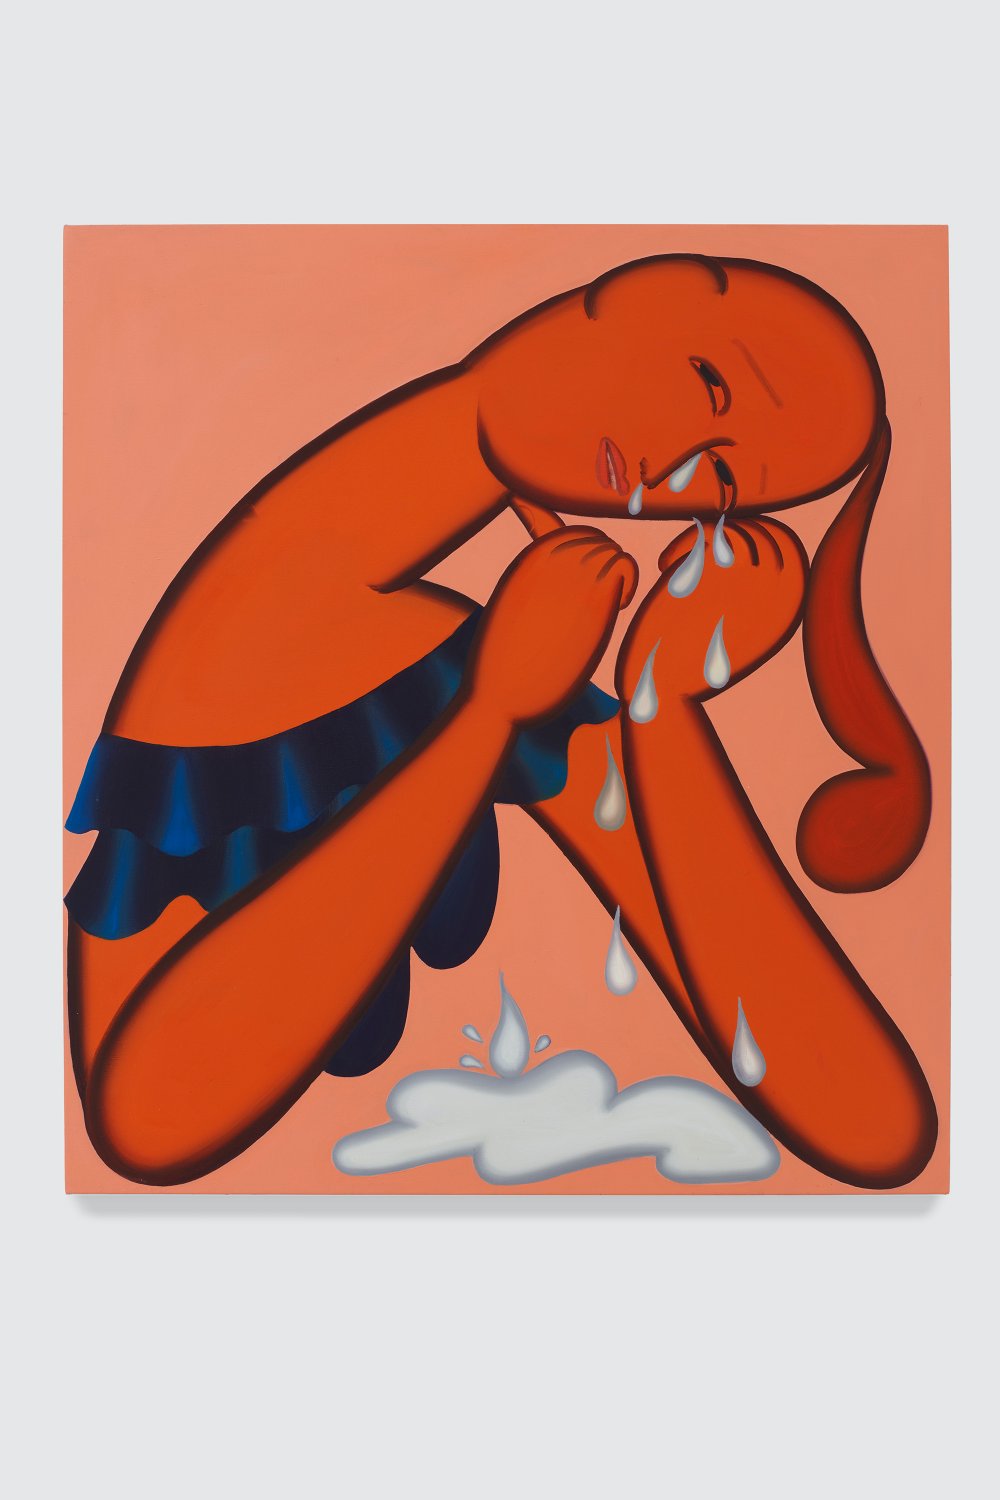 Grace Weaver, Crying (II, Downwards), 2020